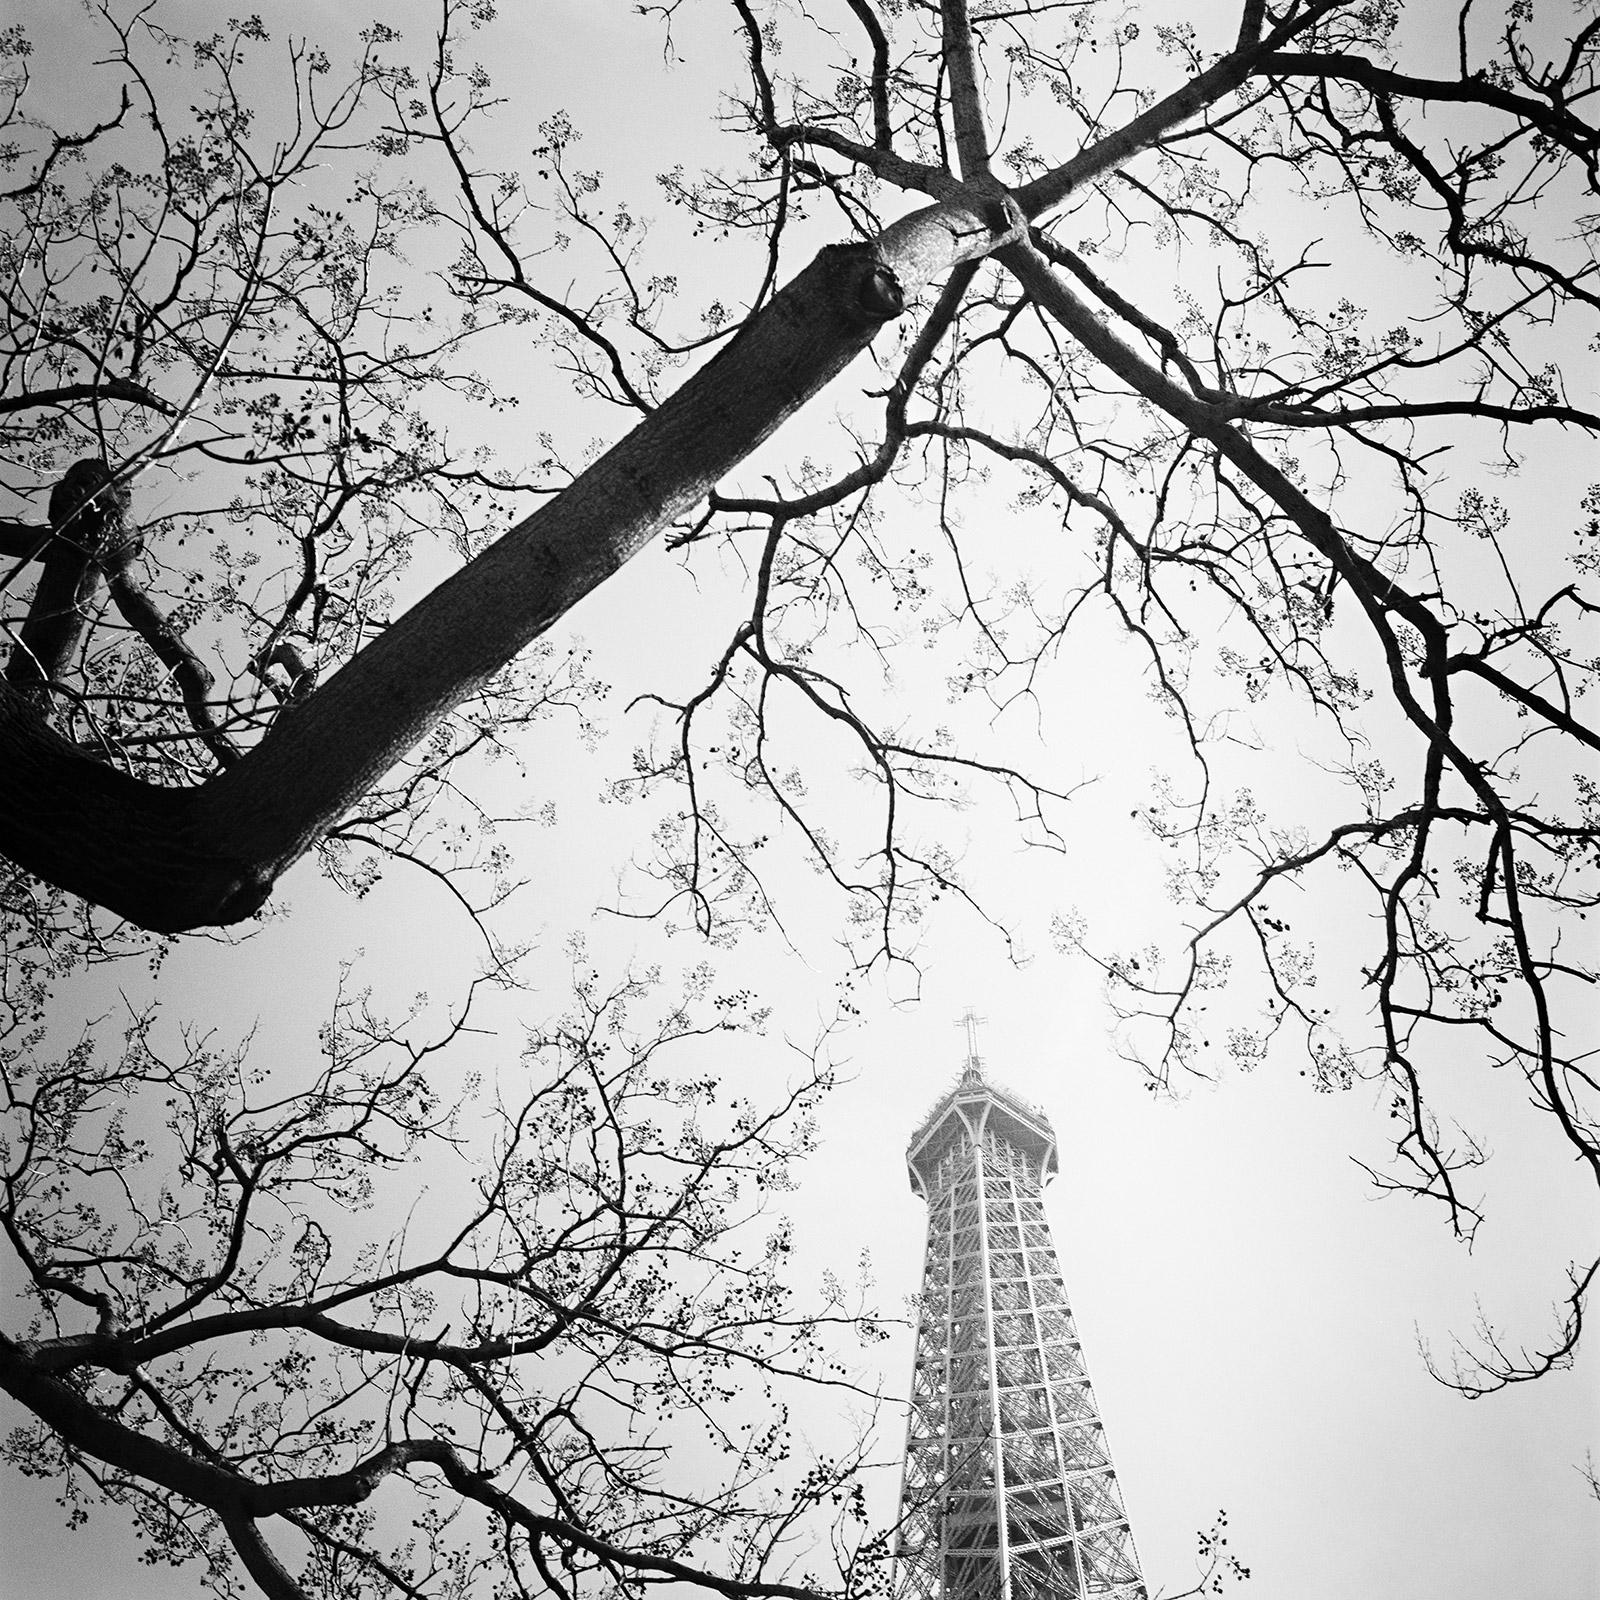 Tree and the Eiffel Tower, Paris, France, black white art landscape photography